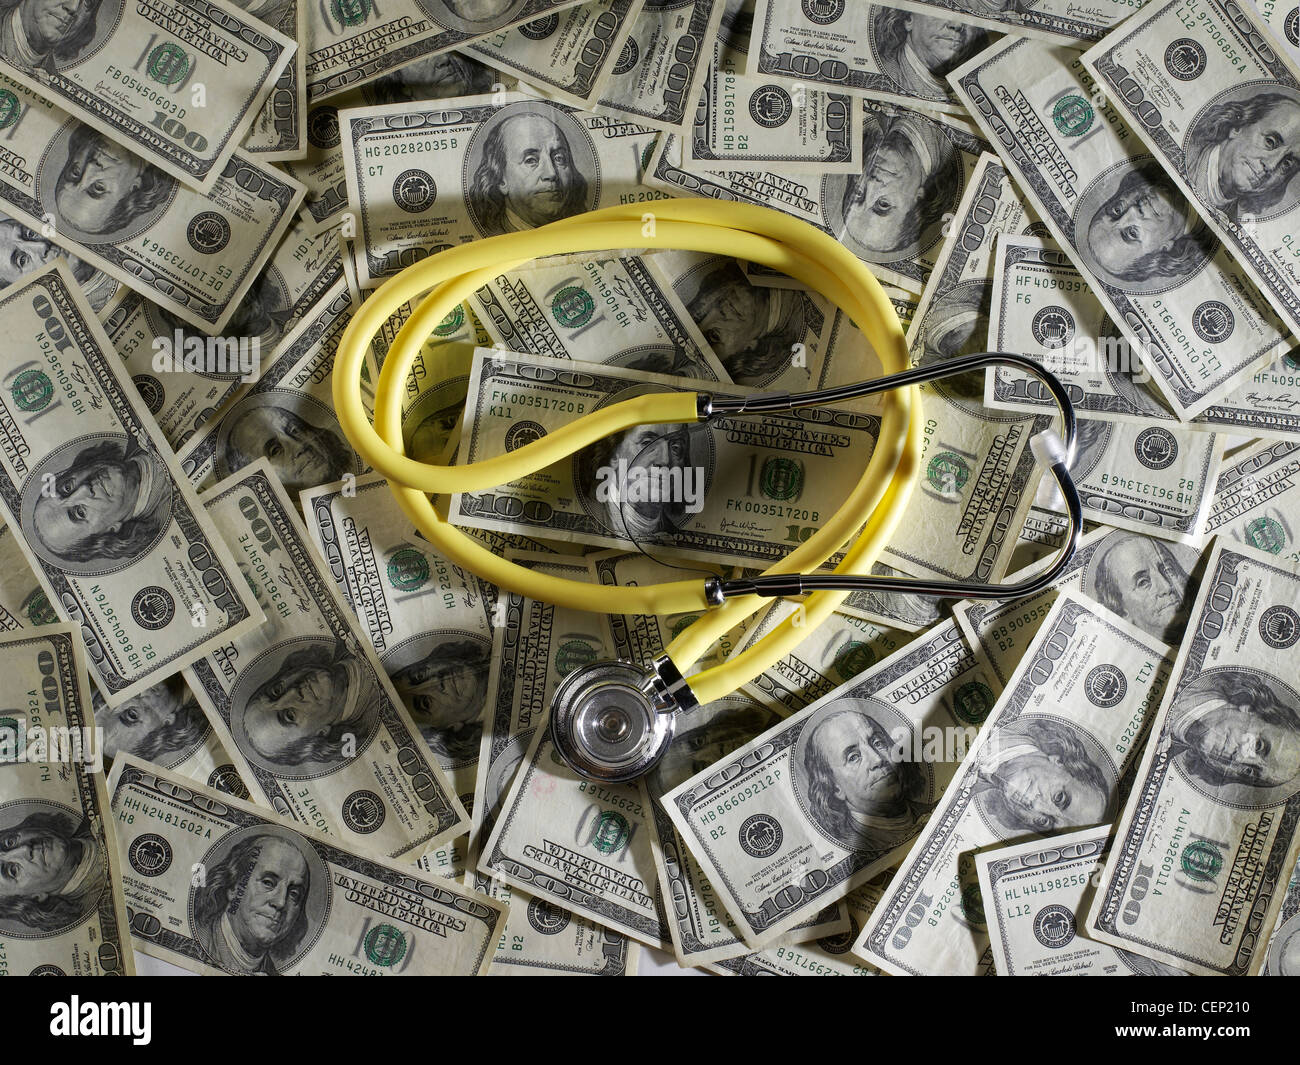 Health Care Medical Costs: Stethoscope and Pile Of Money, USA Stock Photo